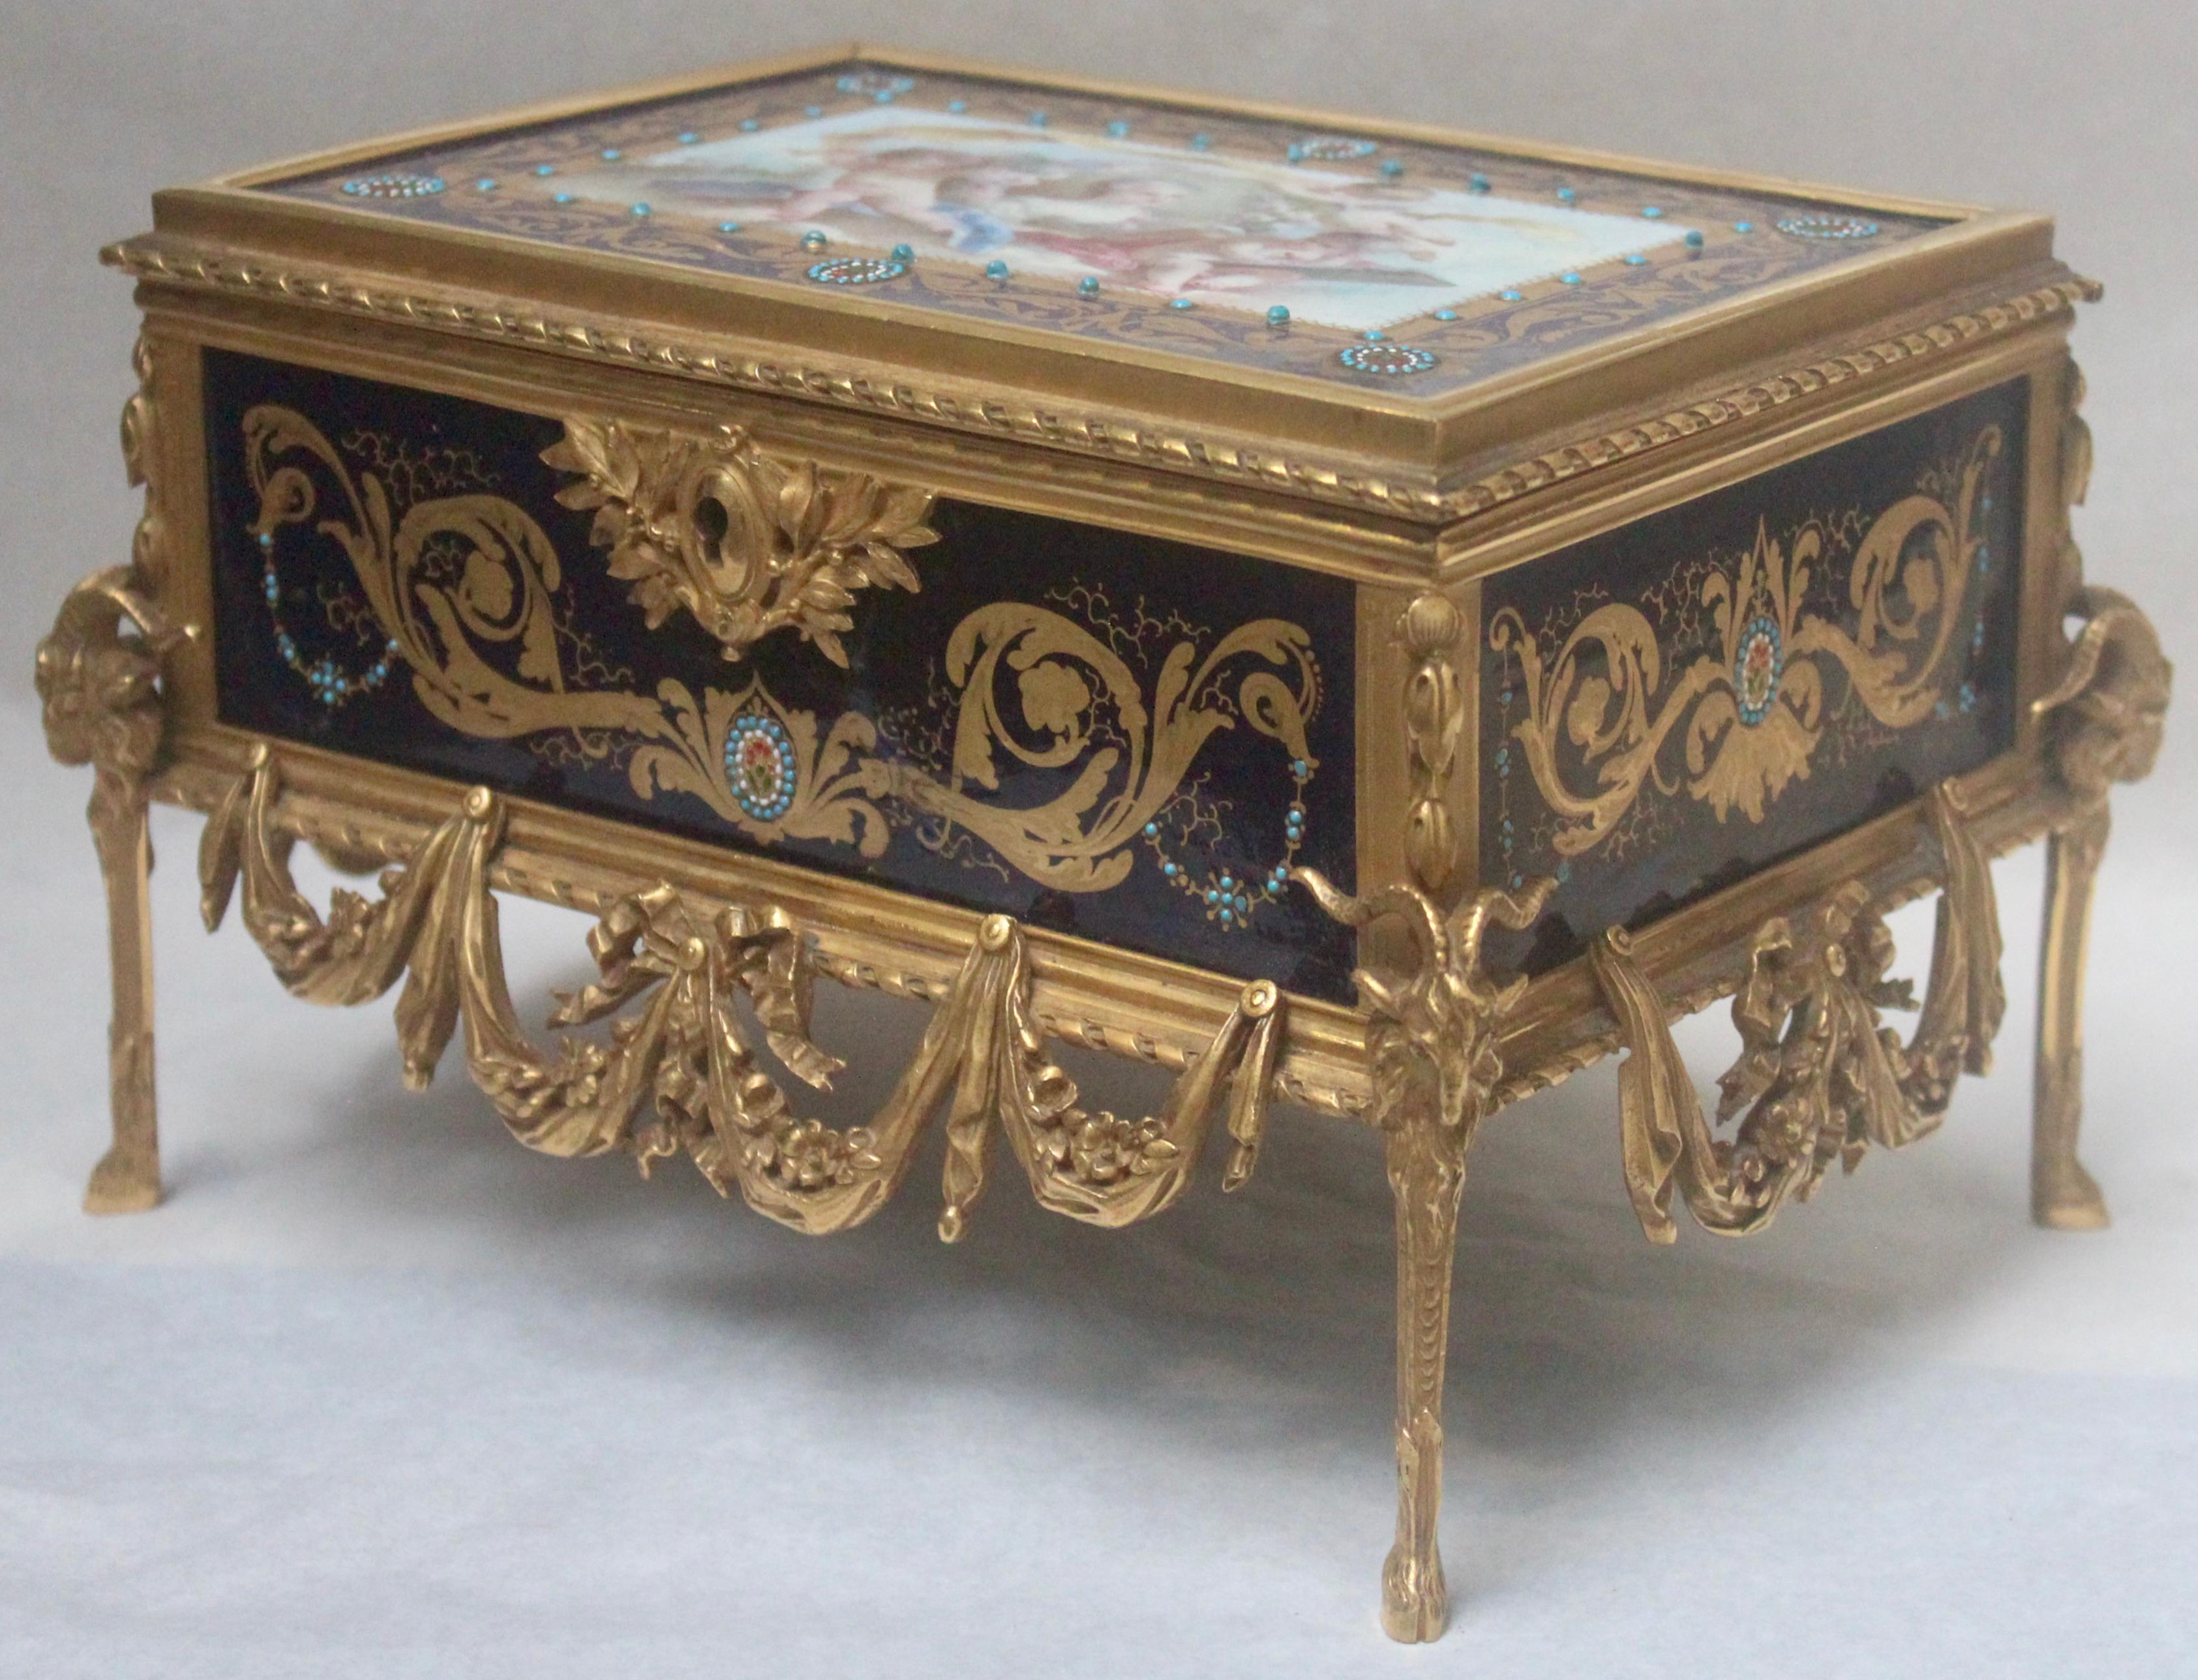 Copper French 19th Century Enameled and Ormolu-Mounted Jewelry Casket